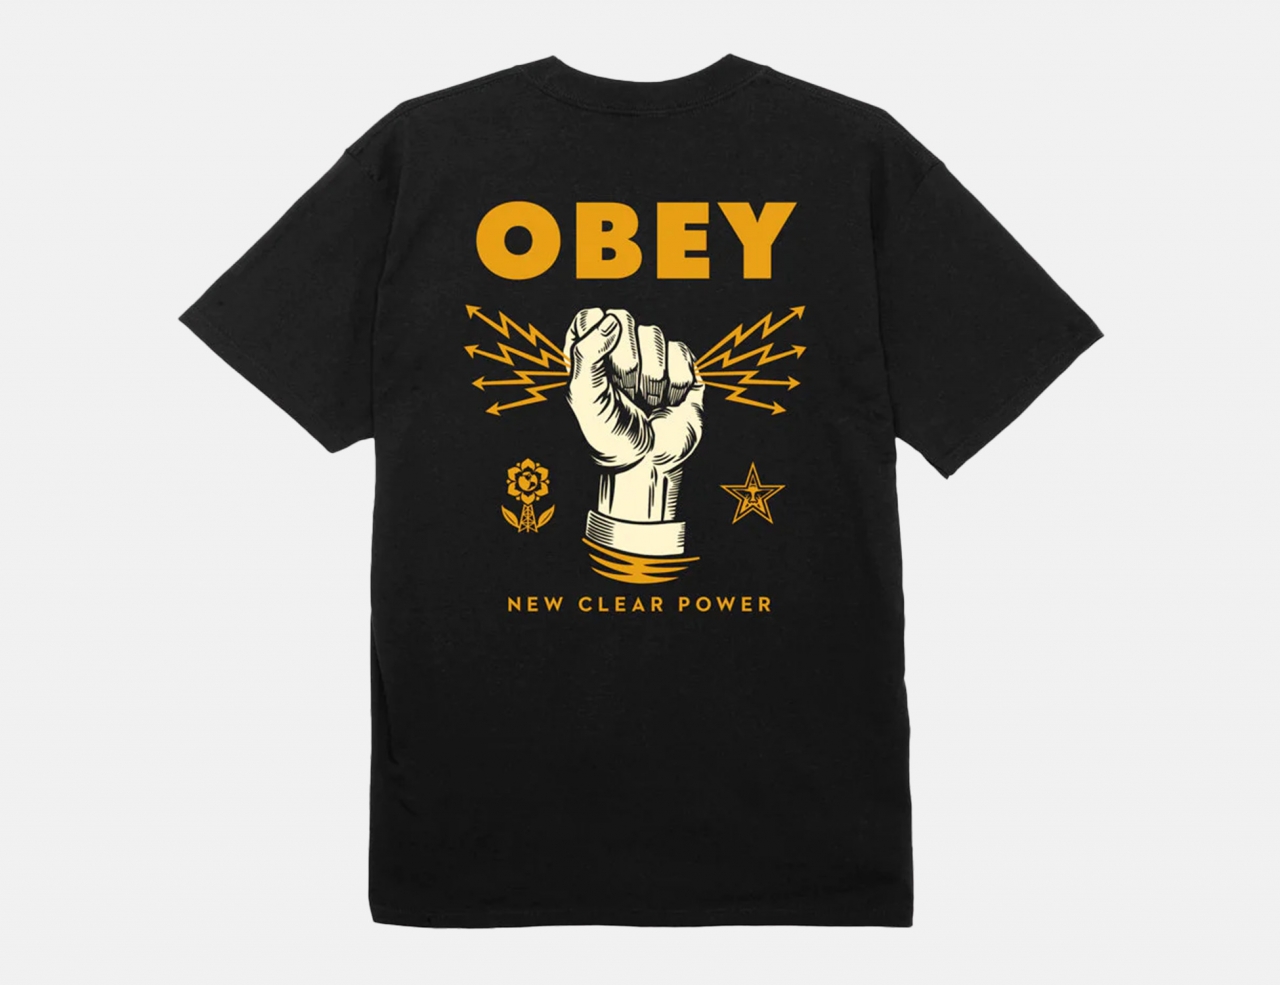 Obey New Clear Power T-Shirt - Black